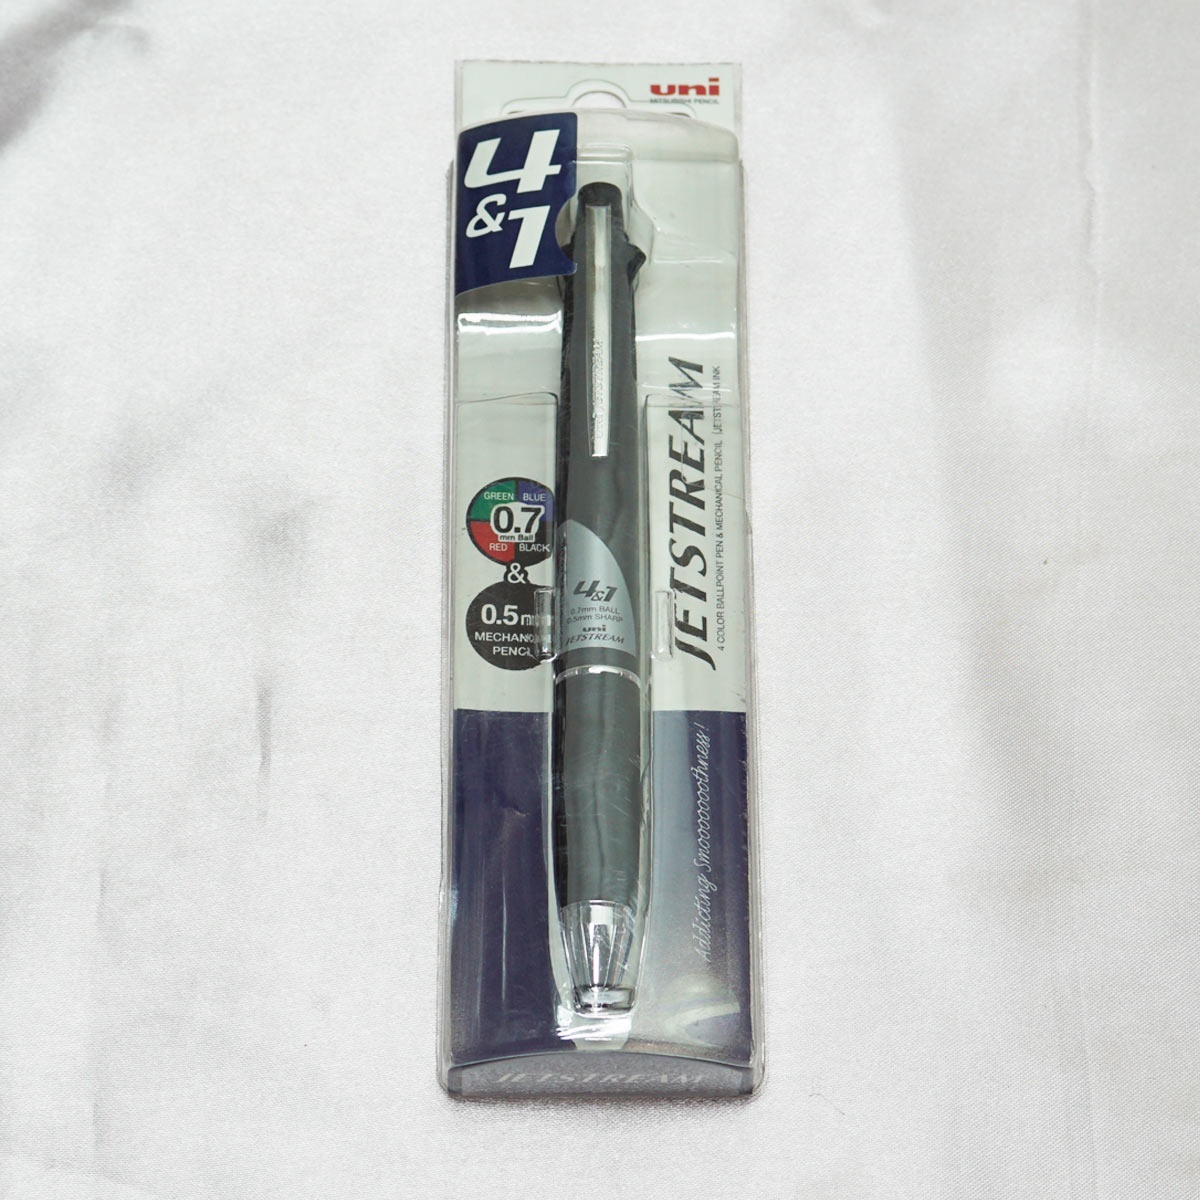 Uniball MSXE5-1000-07 Jetstream Black Color Body With 4 Color 0.7mm Ballpoint Pen and 0.5mm Mechanical Pencil SKU 22473